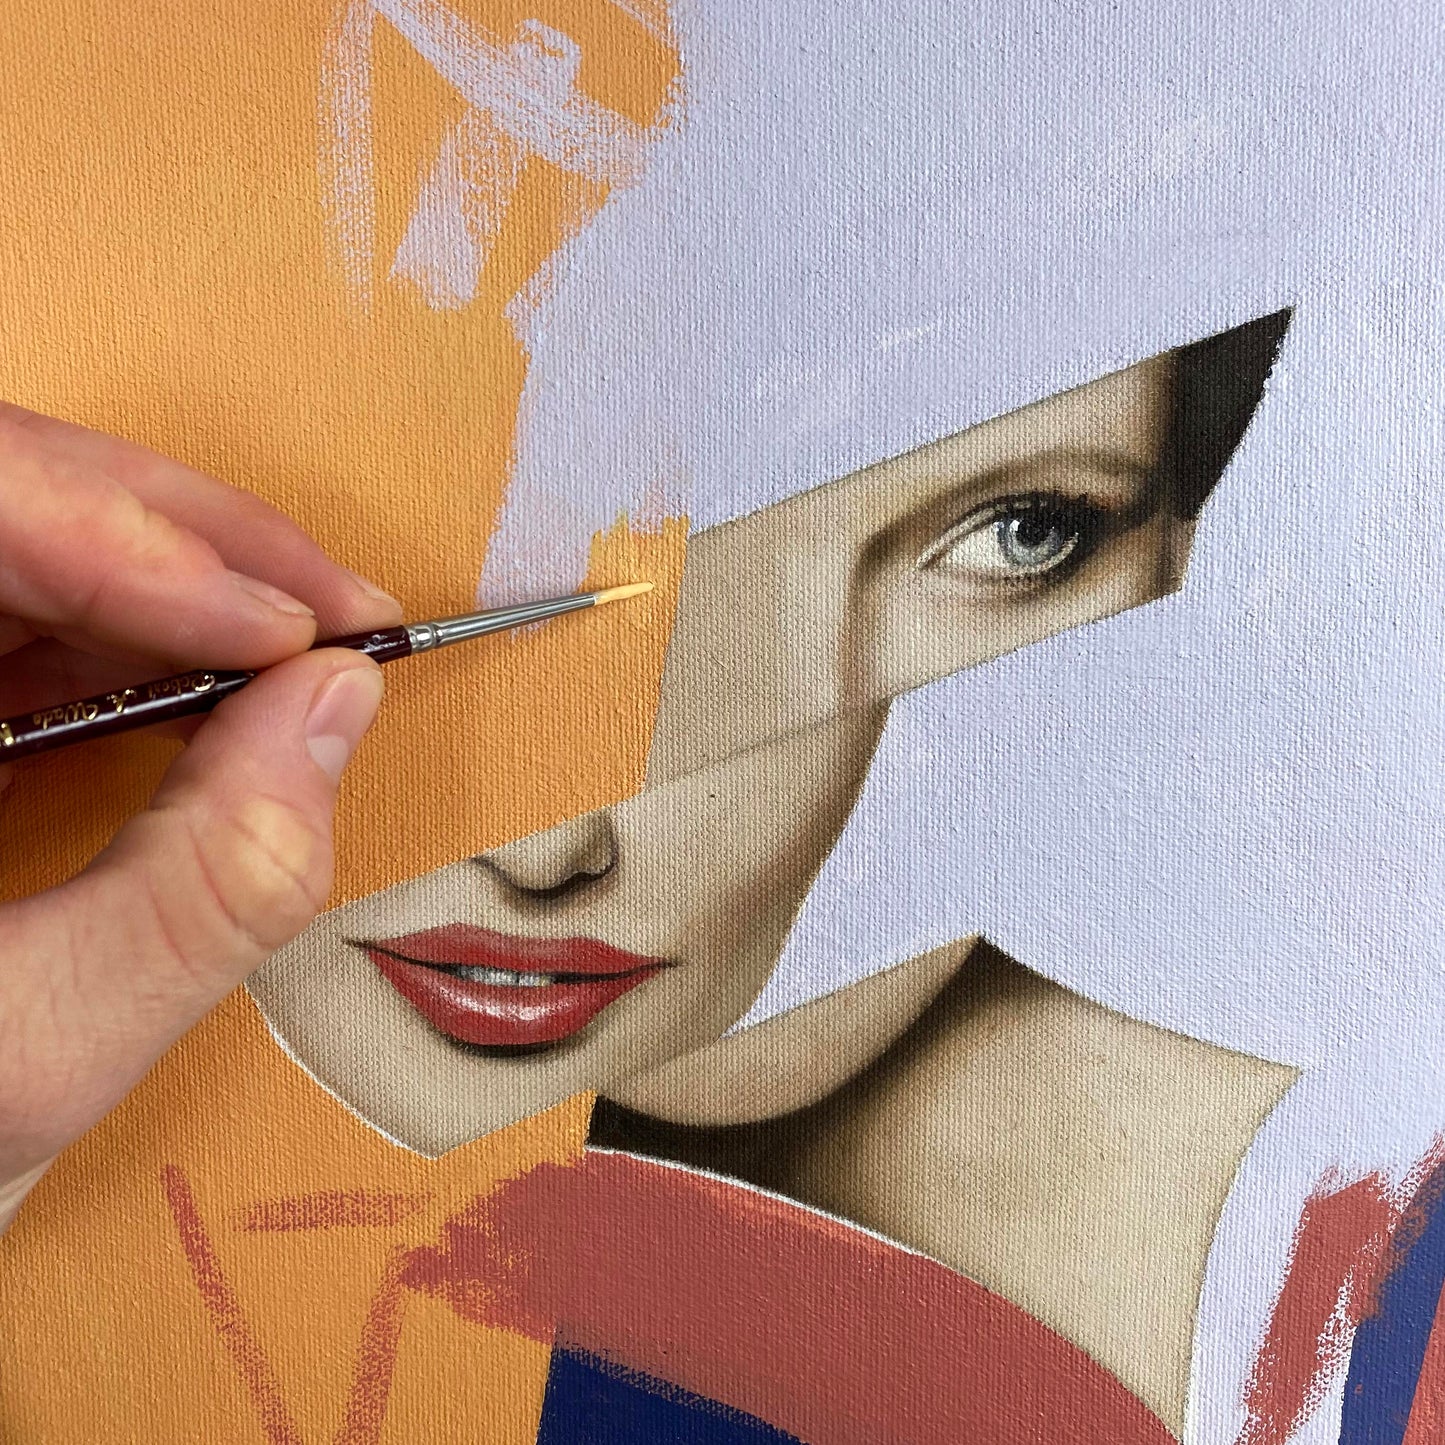 Realism portrait painting in progress on canvas 